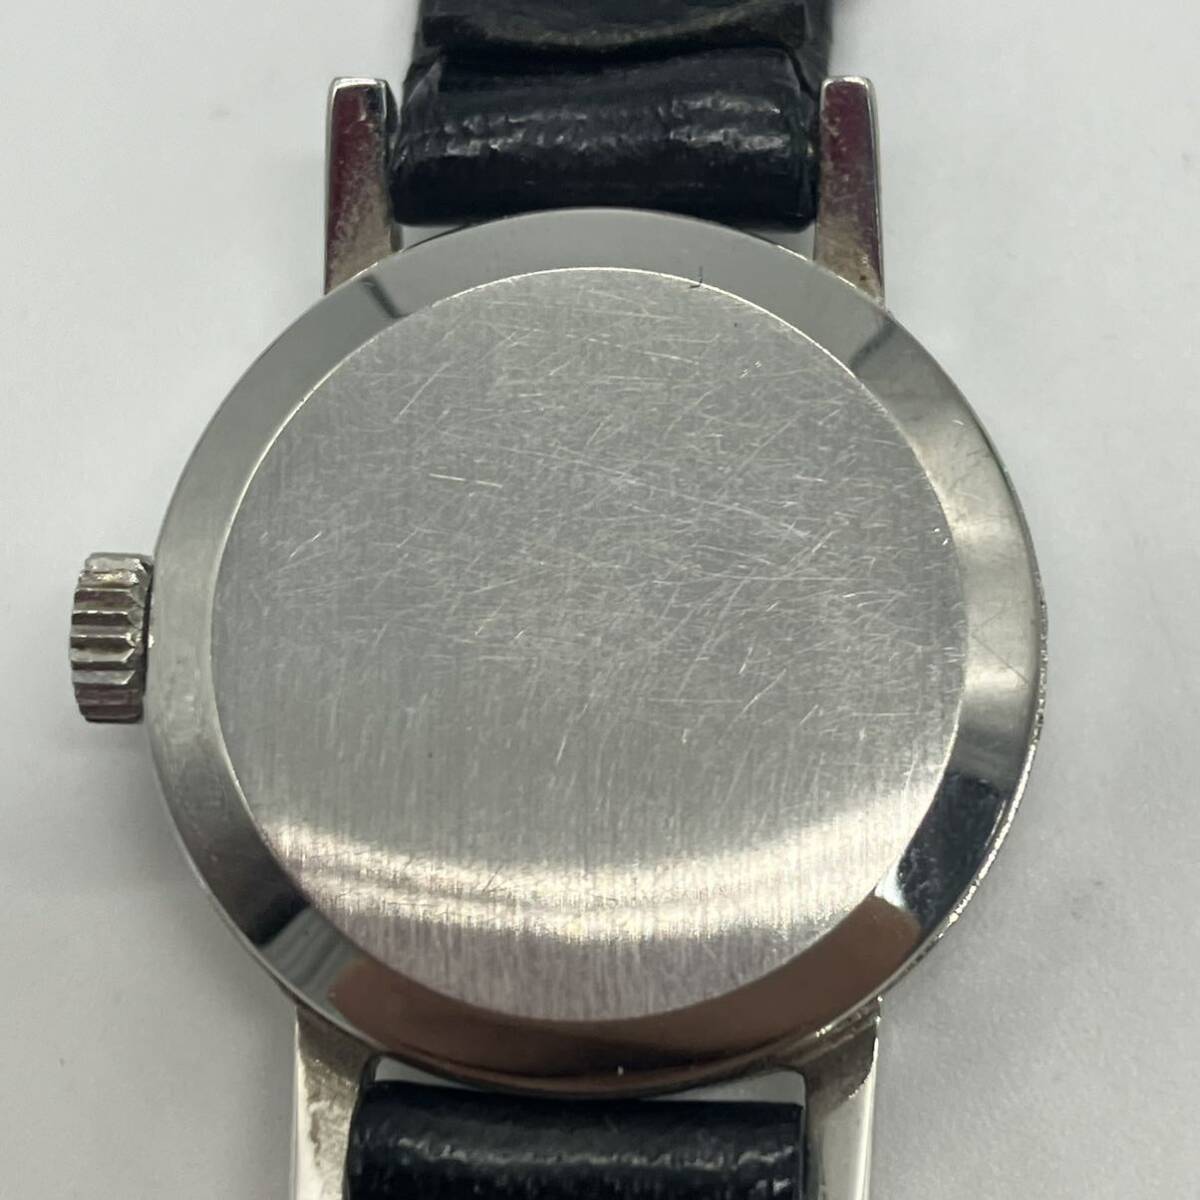 1 jpy ~ 4* OMEGA Omega wristwatch hand winding wristwatch operation verification ending june-b belt crack equipped hand winding Vintage silver face operation goods 